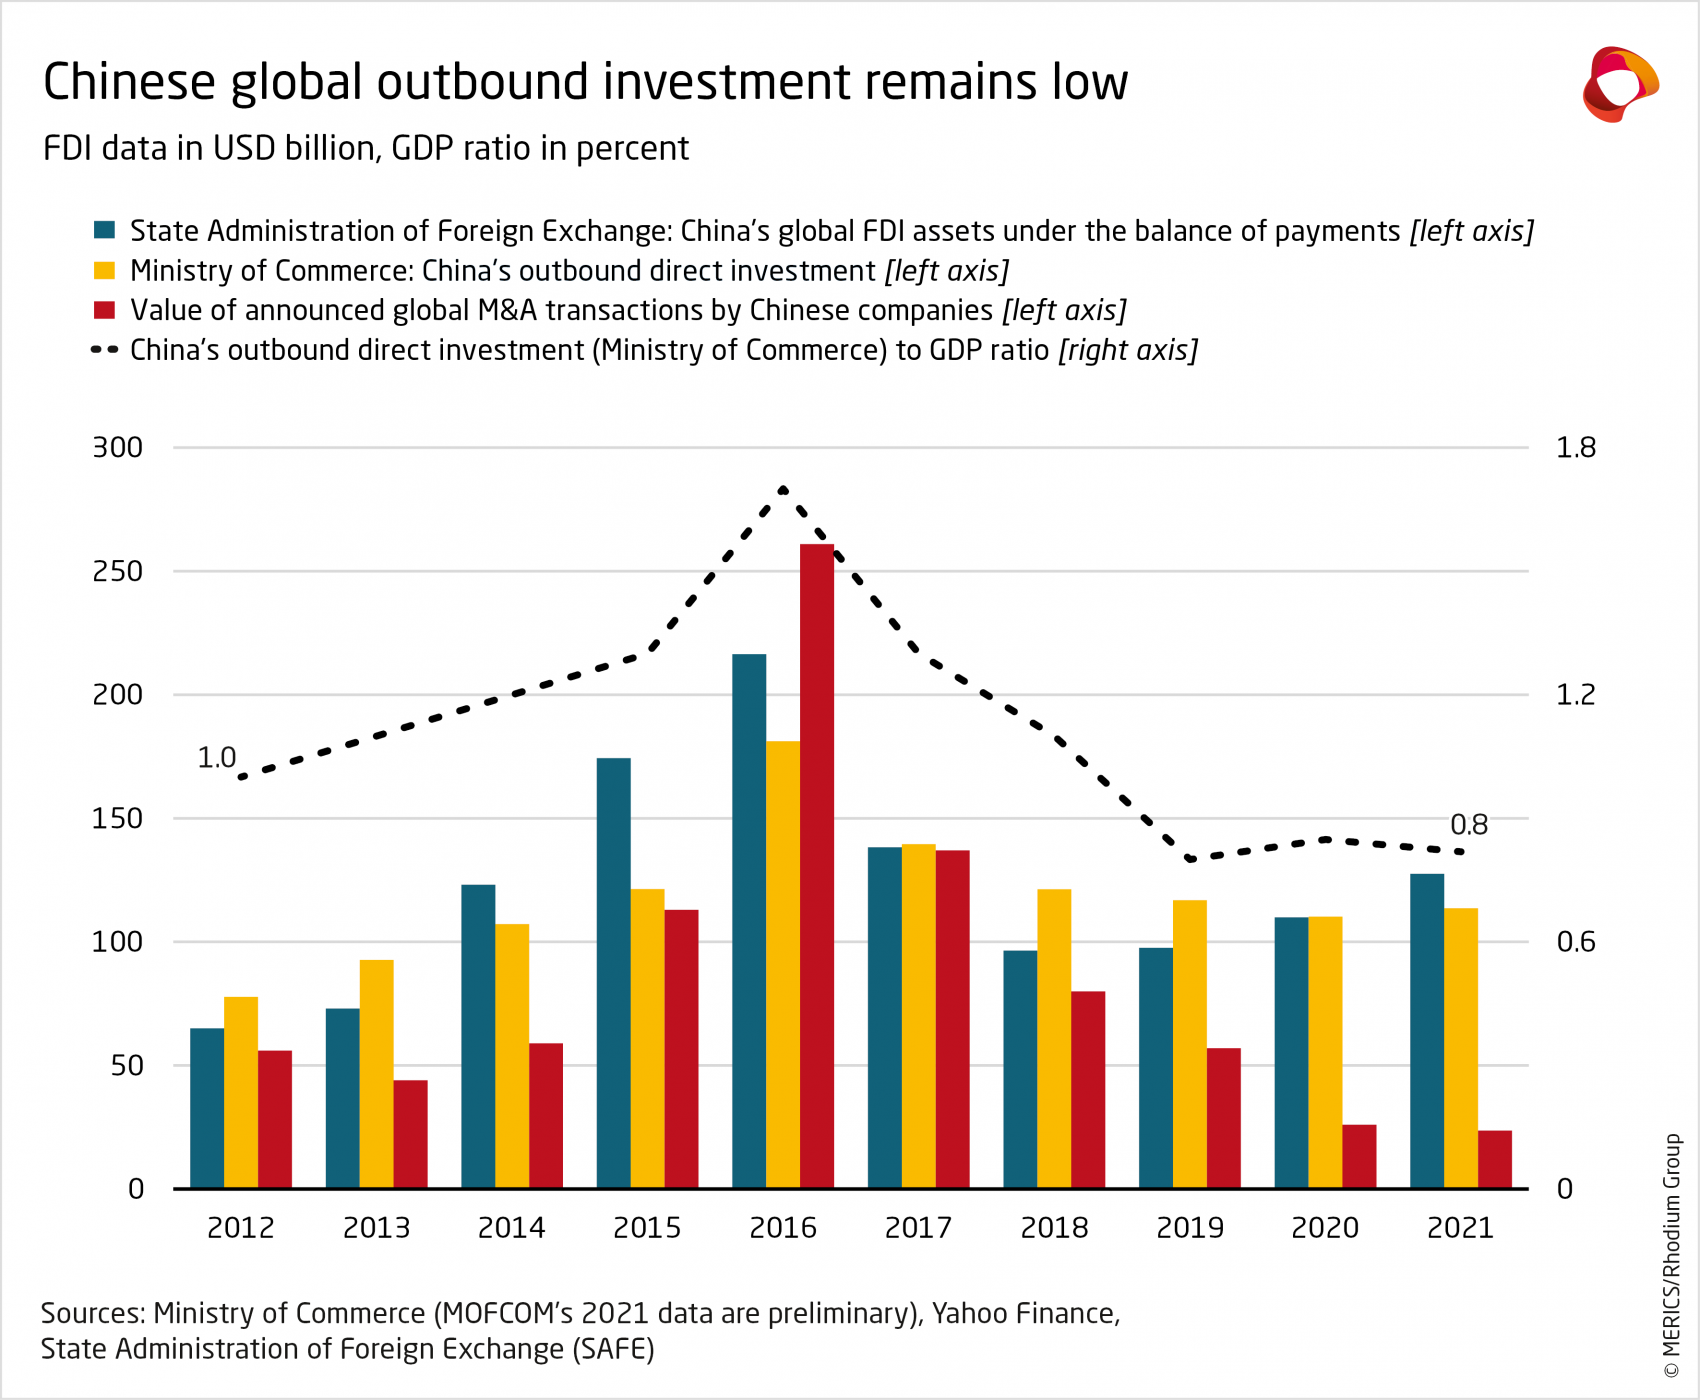 Chinese global outbound investment remains low